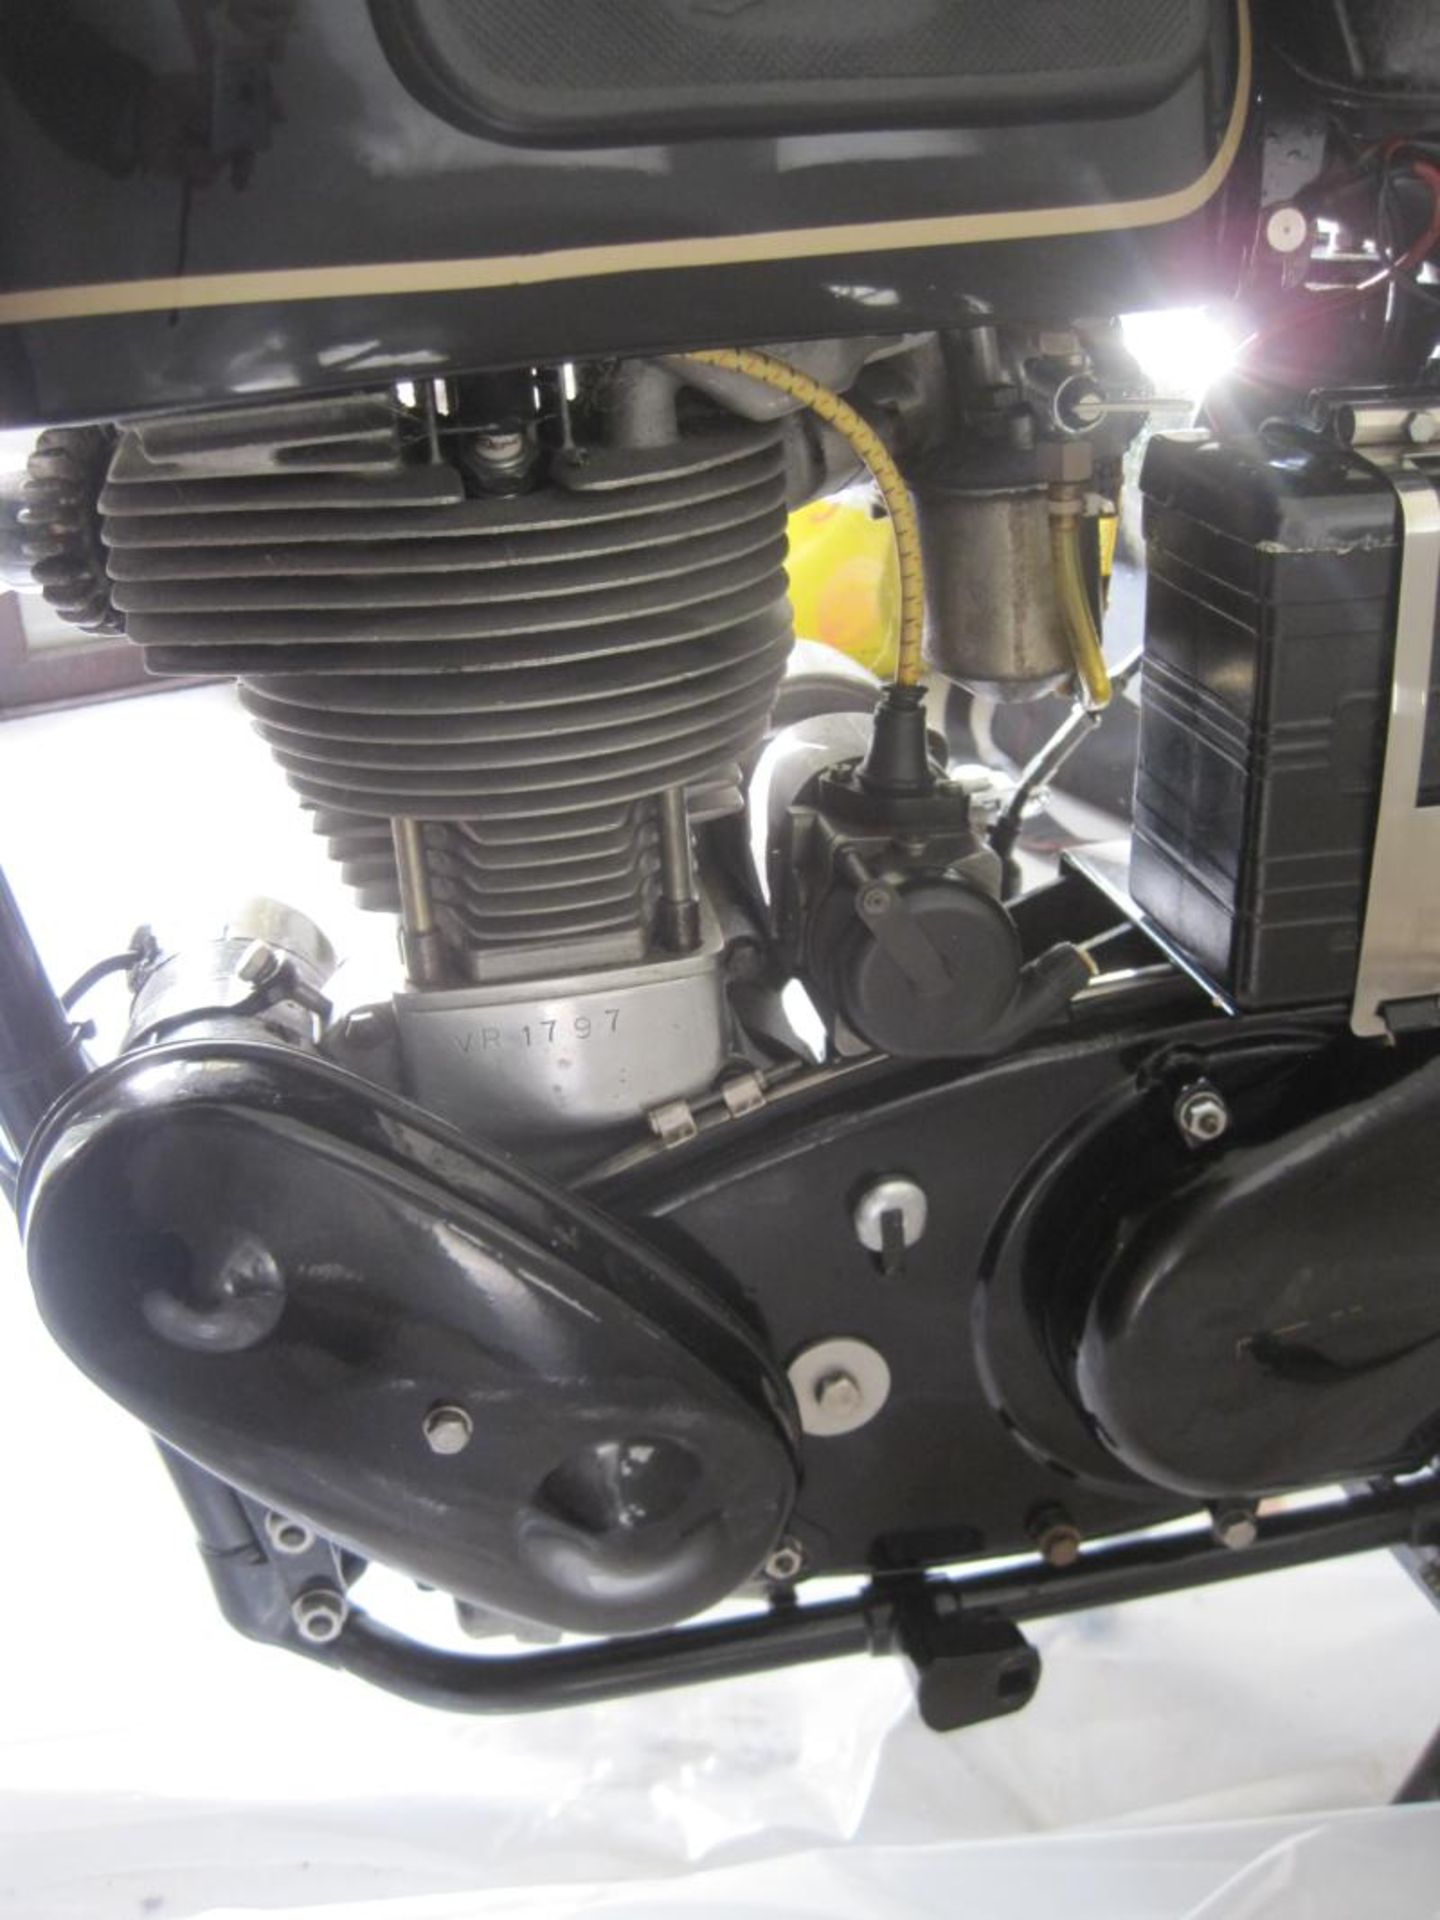 1956 350cc Velocette Viper Reg. No. XFO 643 Frame No. RS11109 Engine No. VR1797 Consigned from the - Image 5 of 7